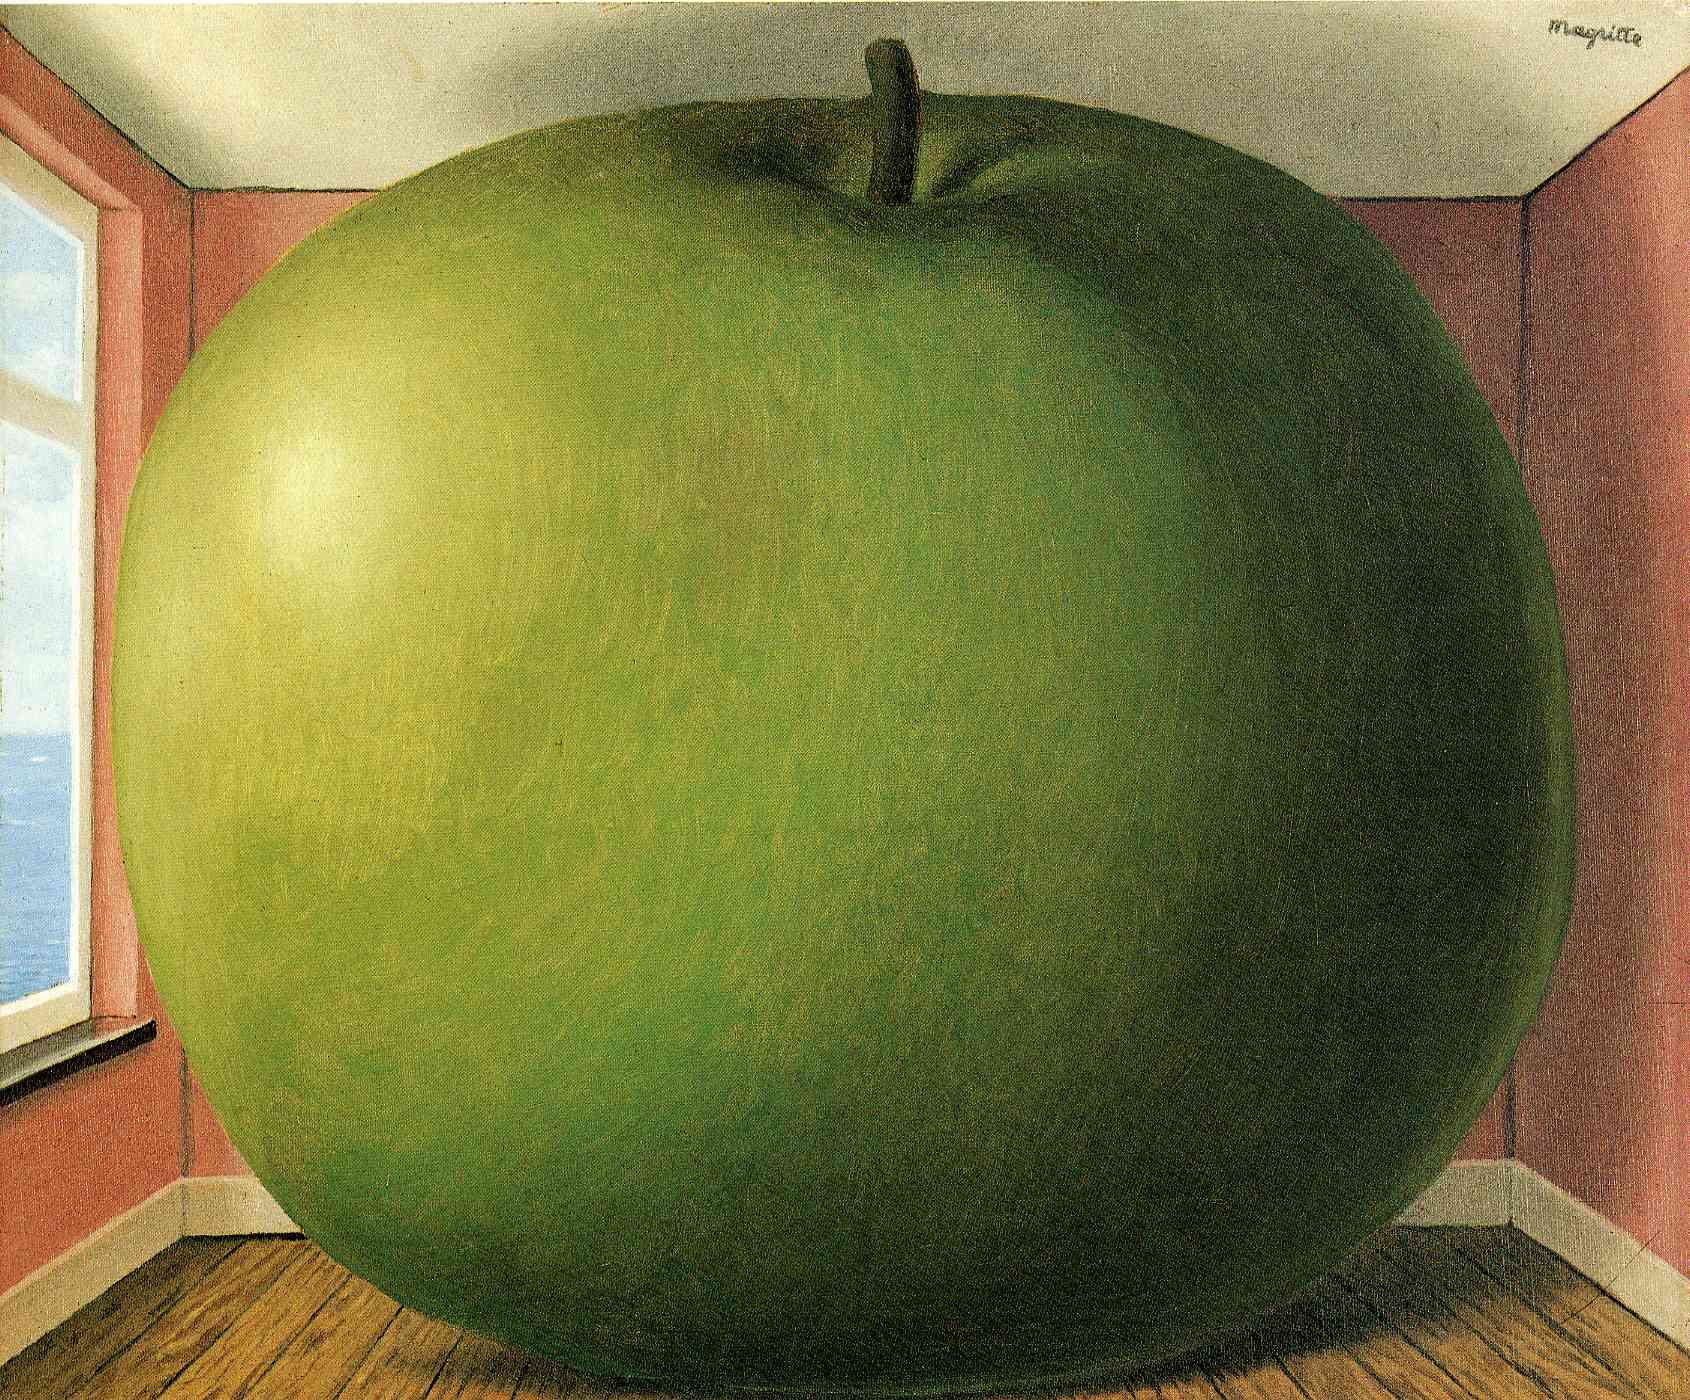 The Listening Room by René Magritte - 1952 - 55 x 45 cm Menil Collection